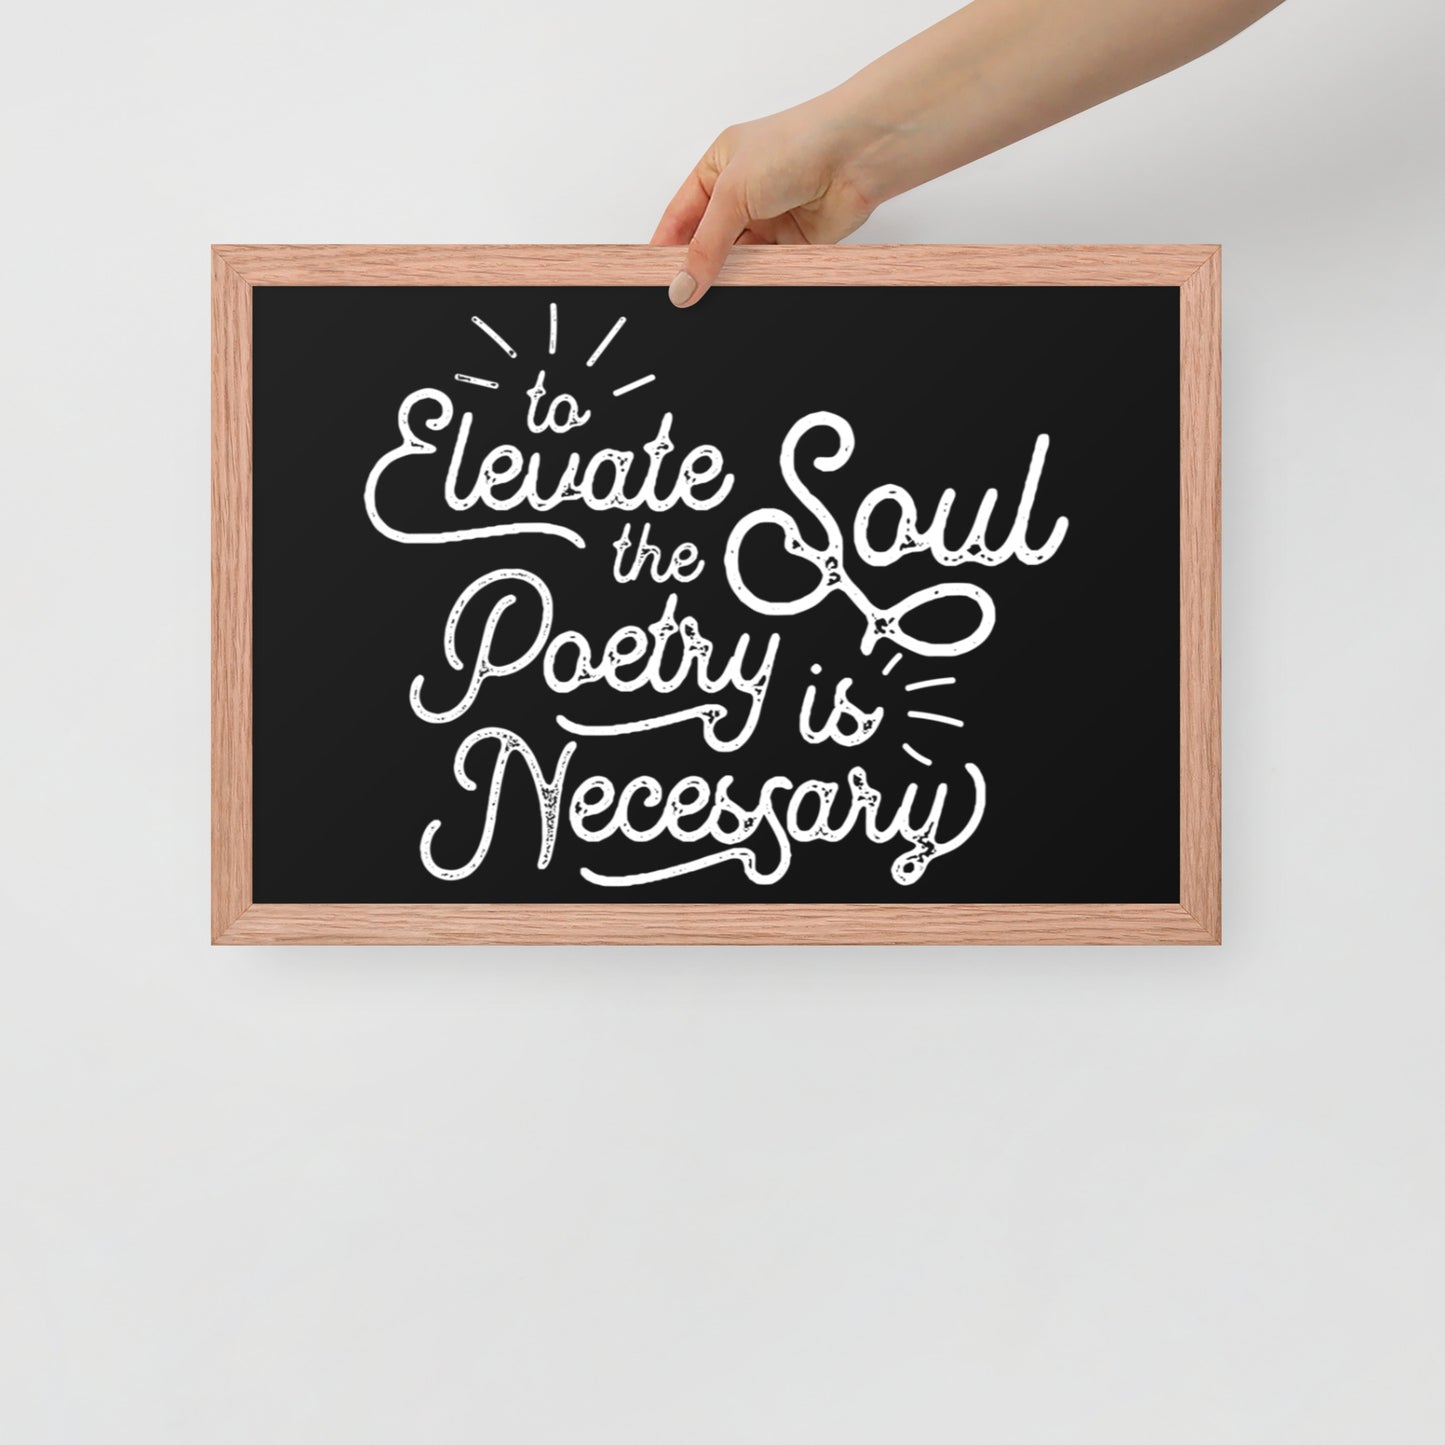 To Elevate the Soul Poetry is Necessary Framed Poster - 12 x 18 Red Oak Frame